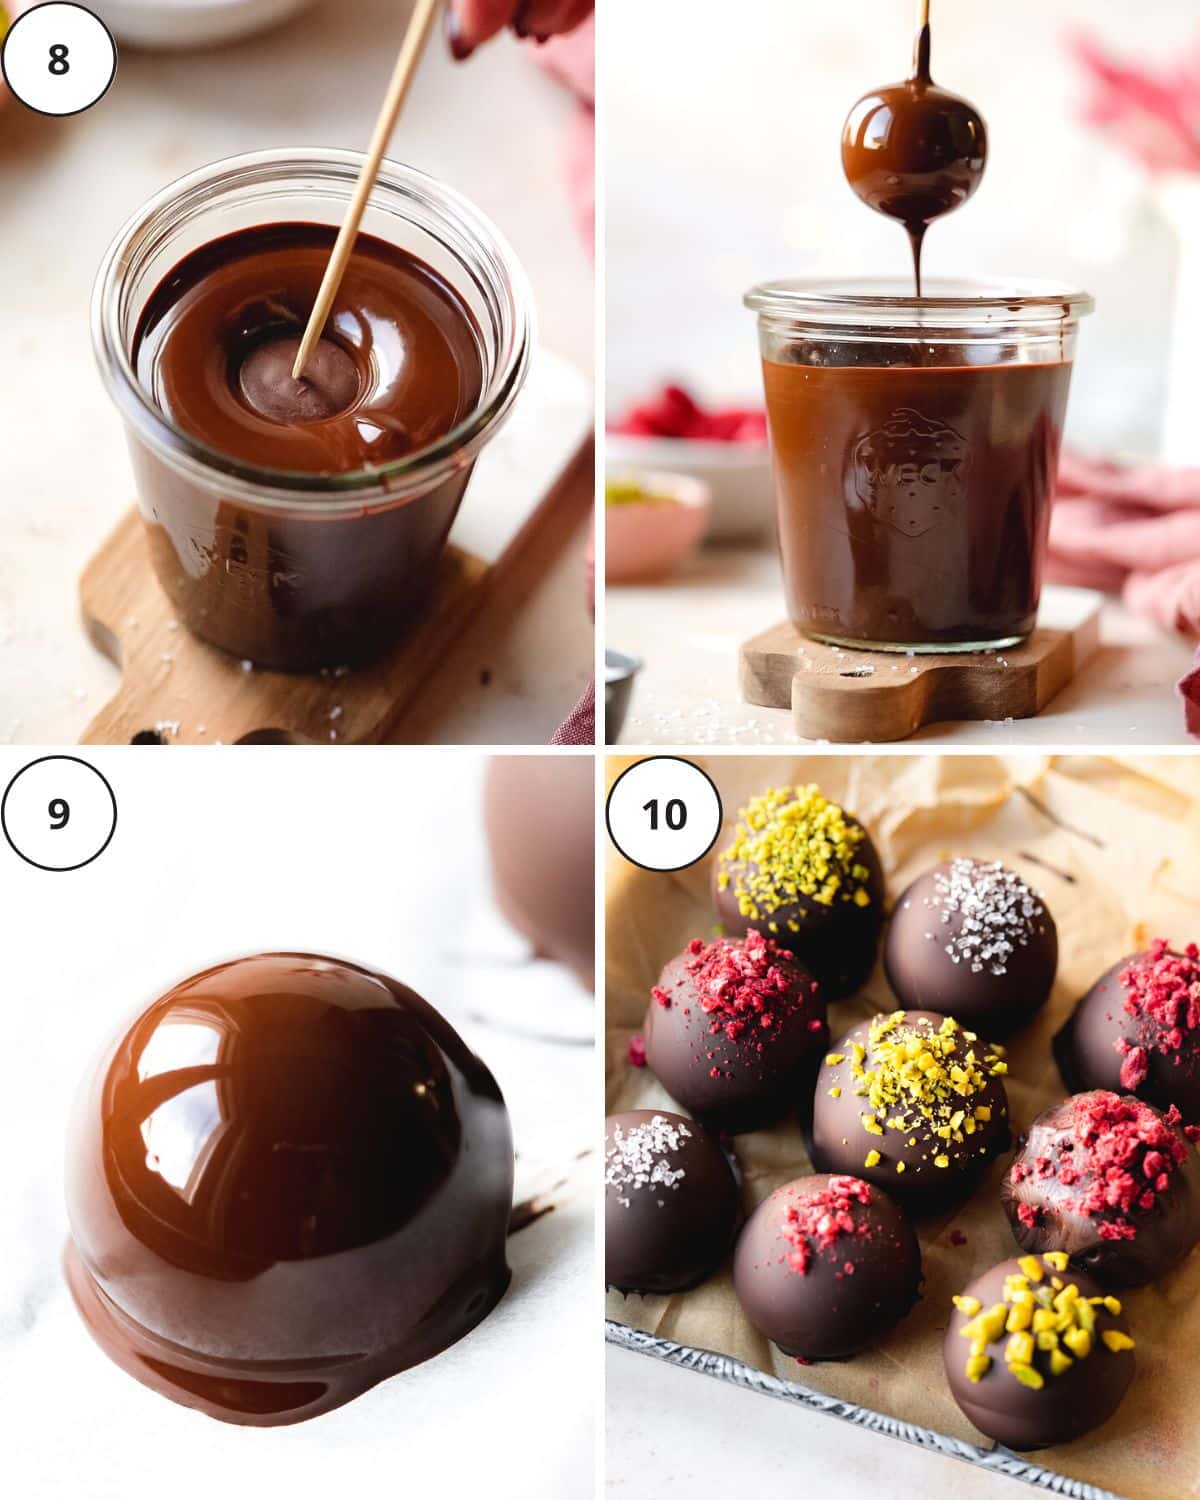 dipping chocolate truffles into a jar of melted chocolate.